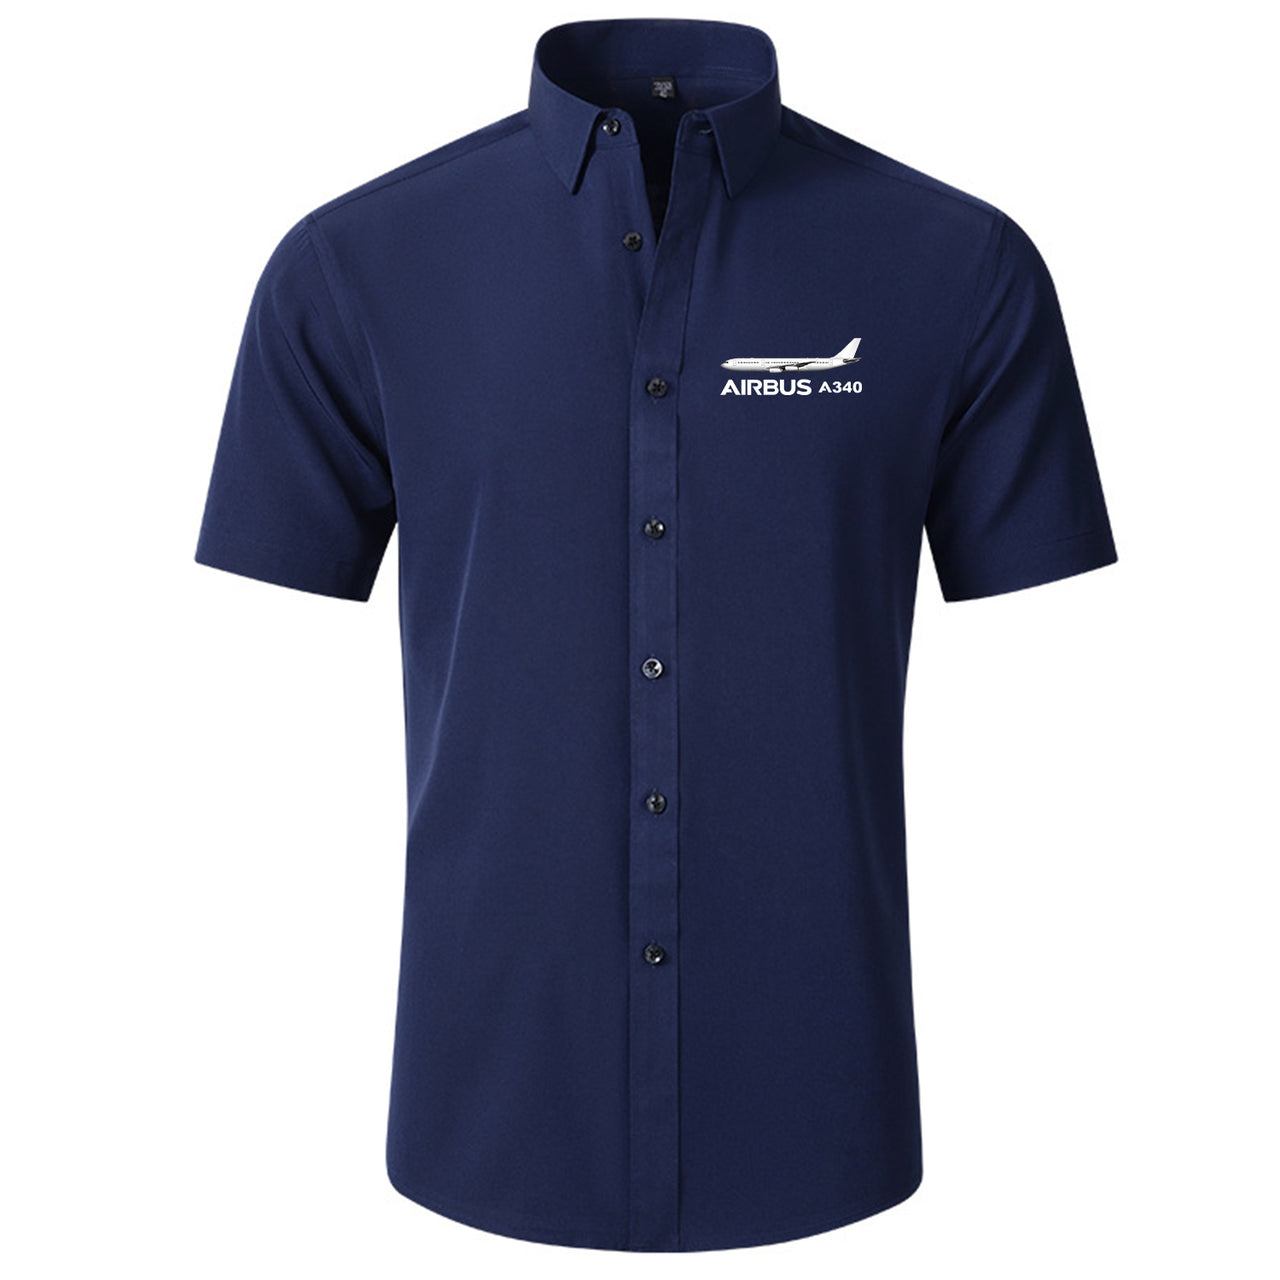 The Airbus A340 Designed Short Sleeve Shirts